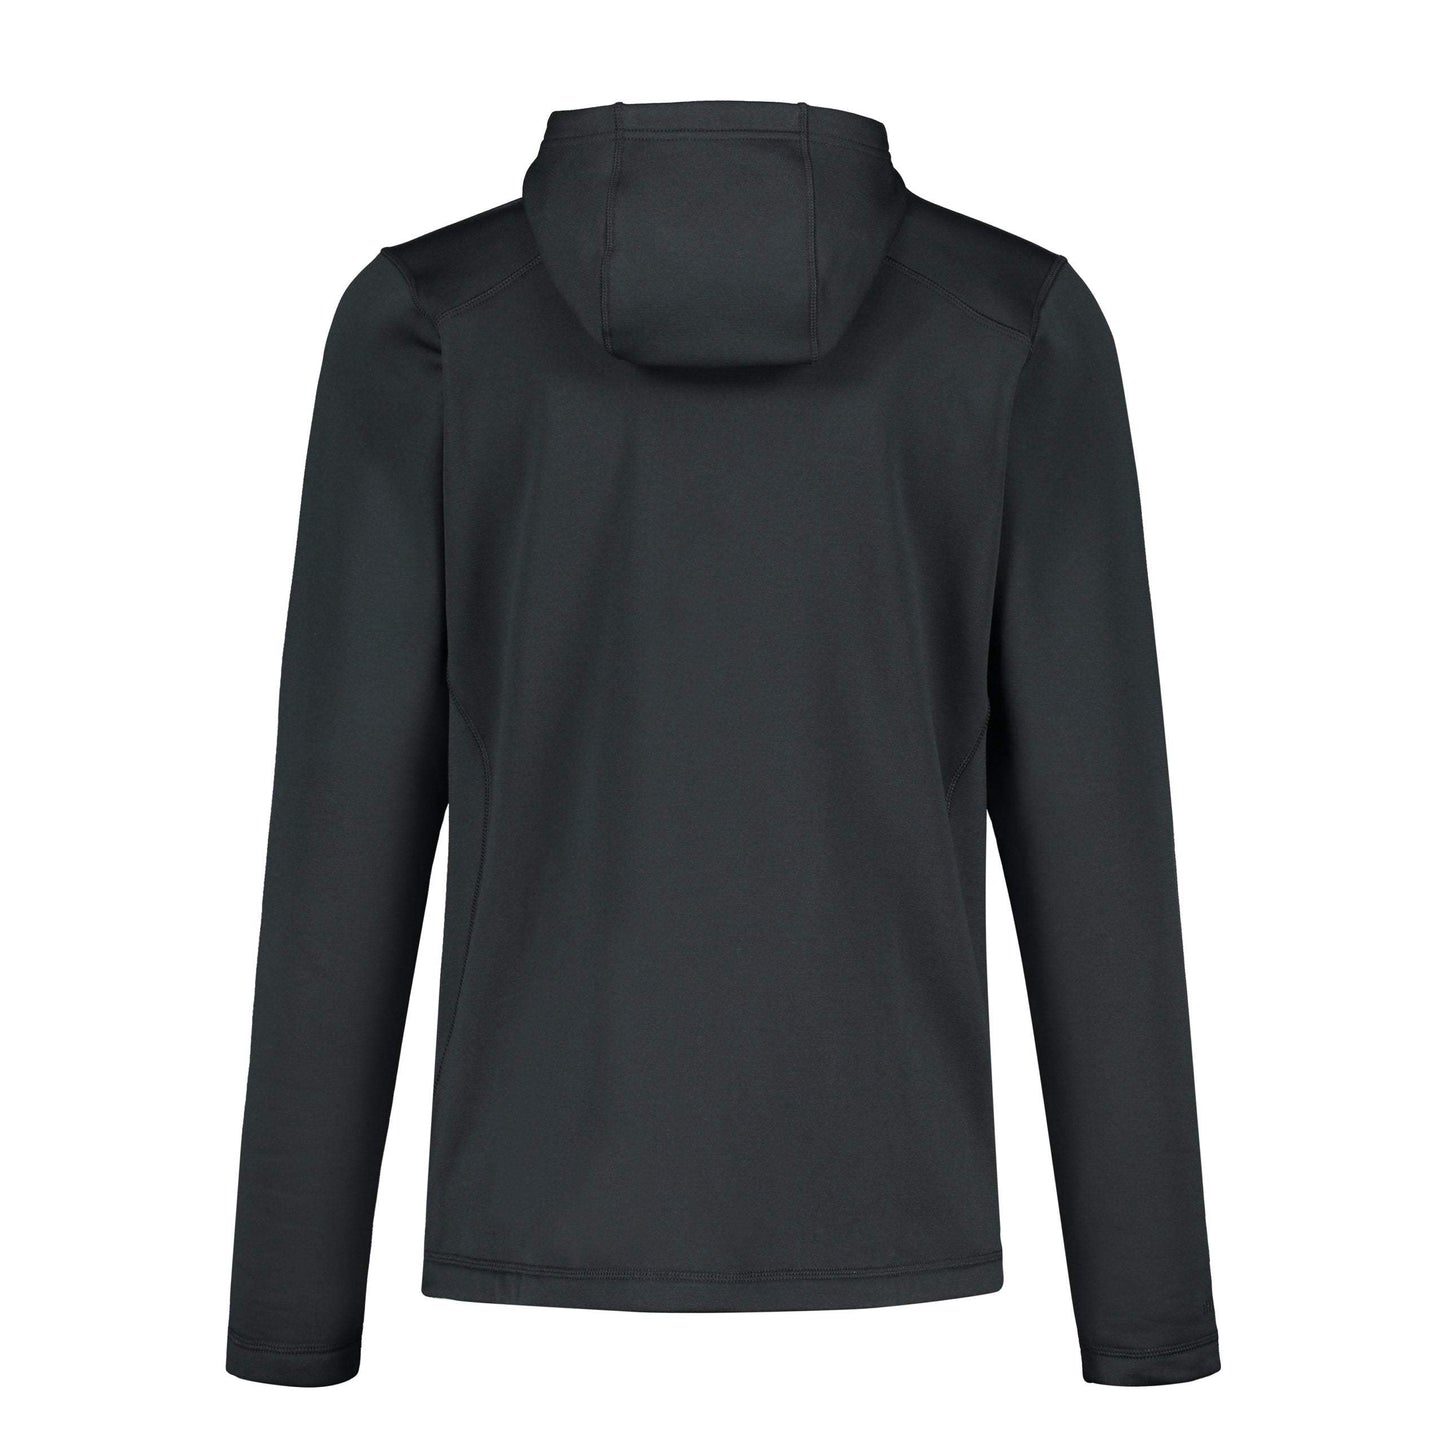 Men’s Geon Hoody by RAB - The Luxury Promotional Gifts Company Limited